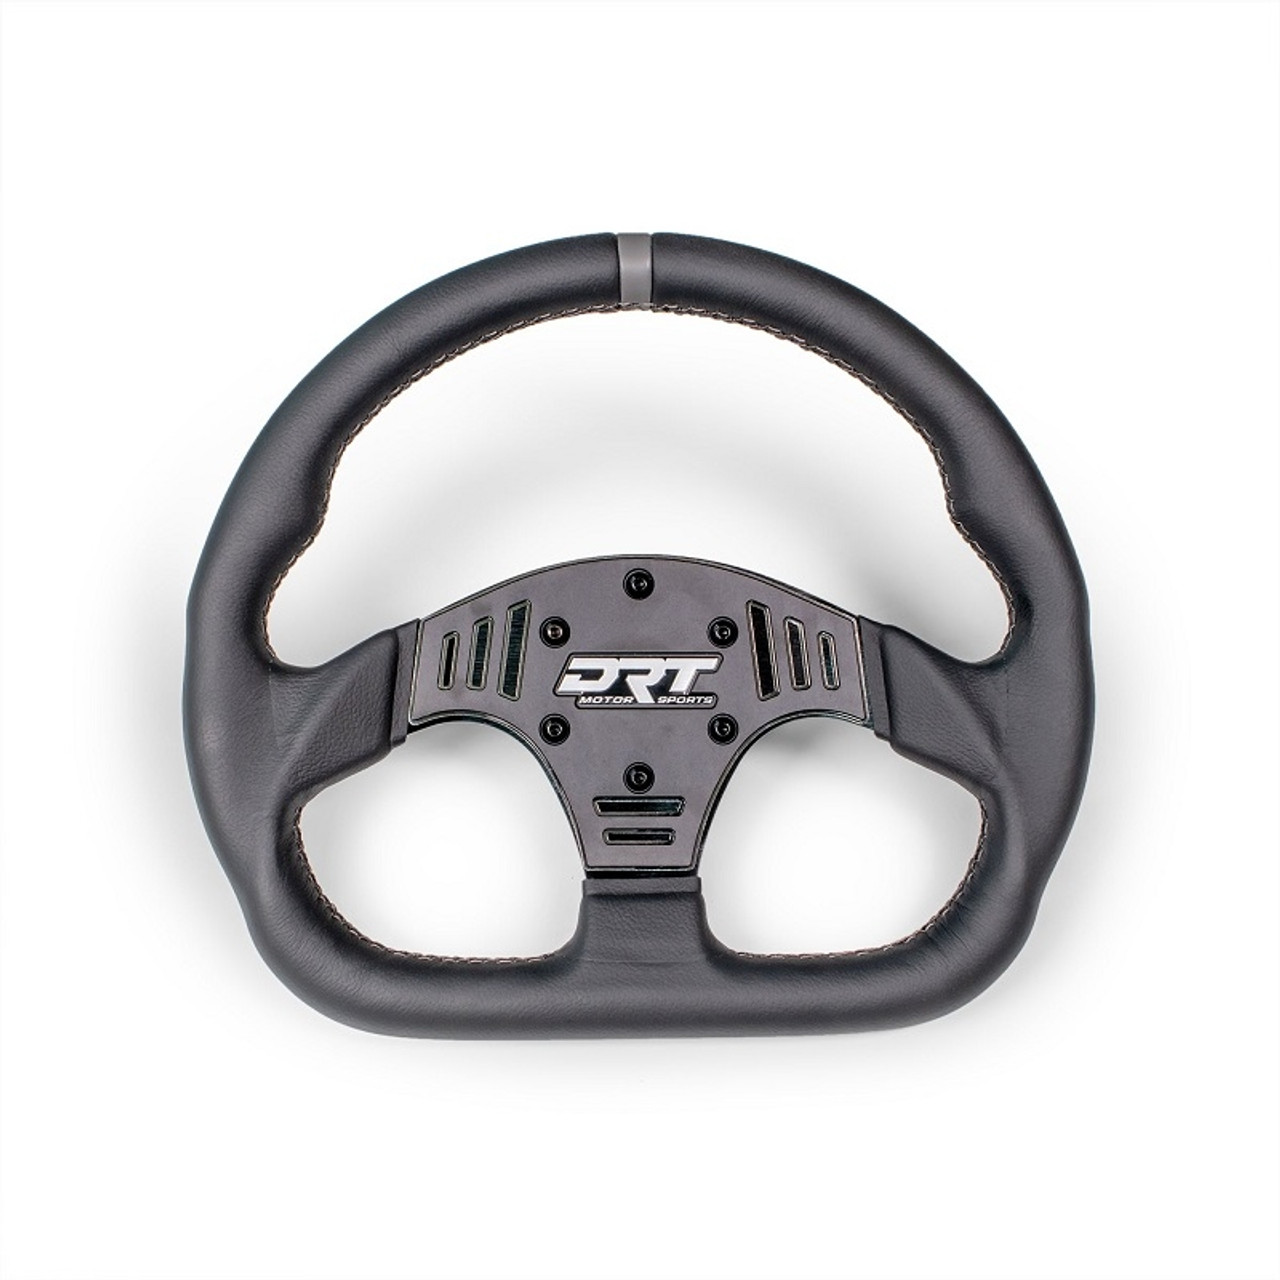 A D-shaped DRT Powersports steering wheel, uninstalled and against a blank background